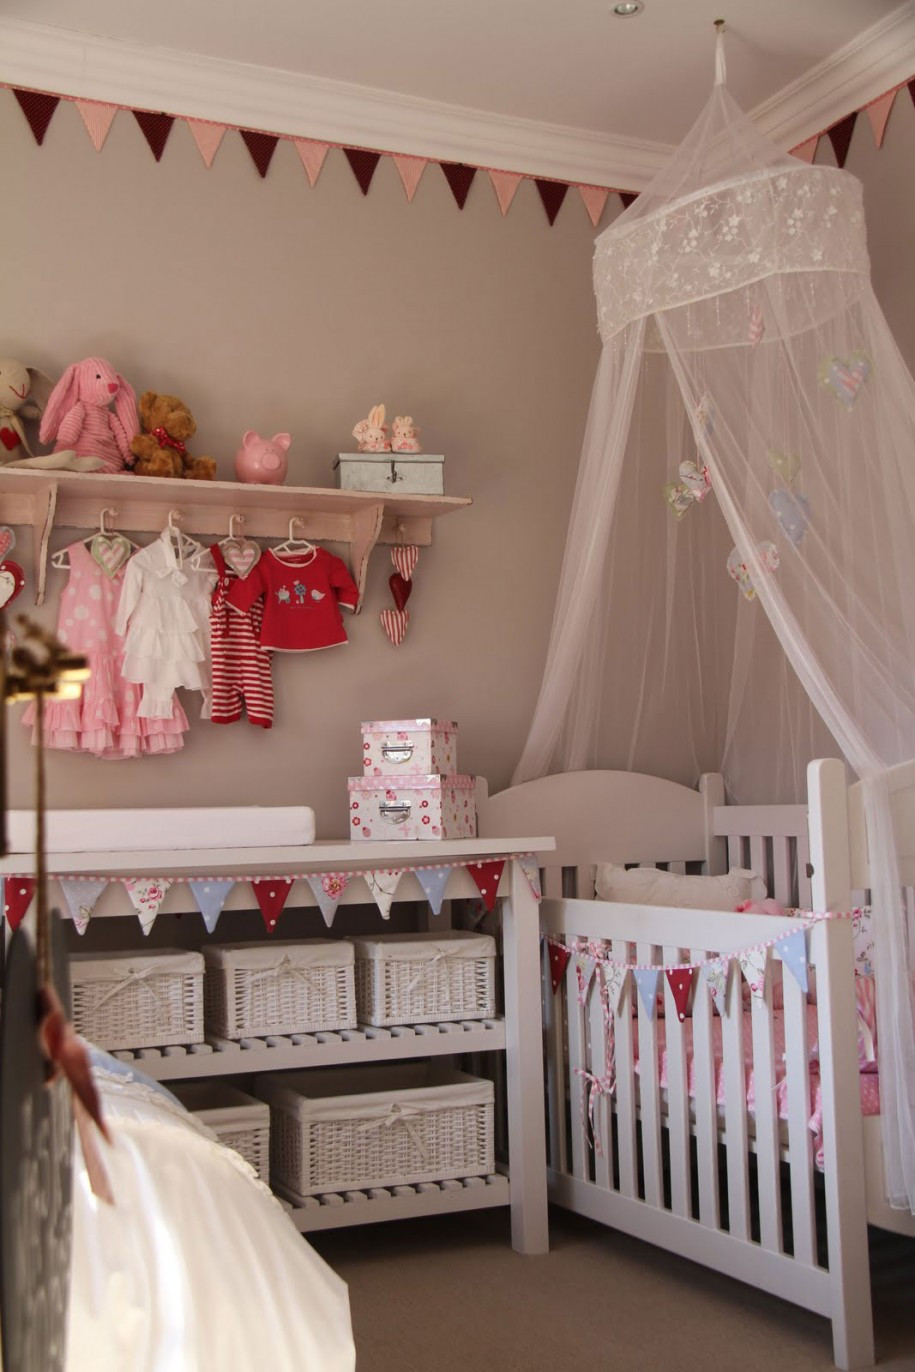 How To Decorate Baby Room
 Antique Baby Room Ideas Designed for Modern House